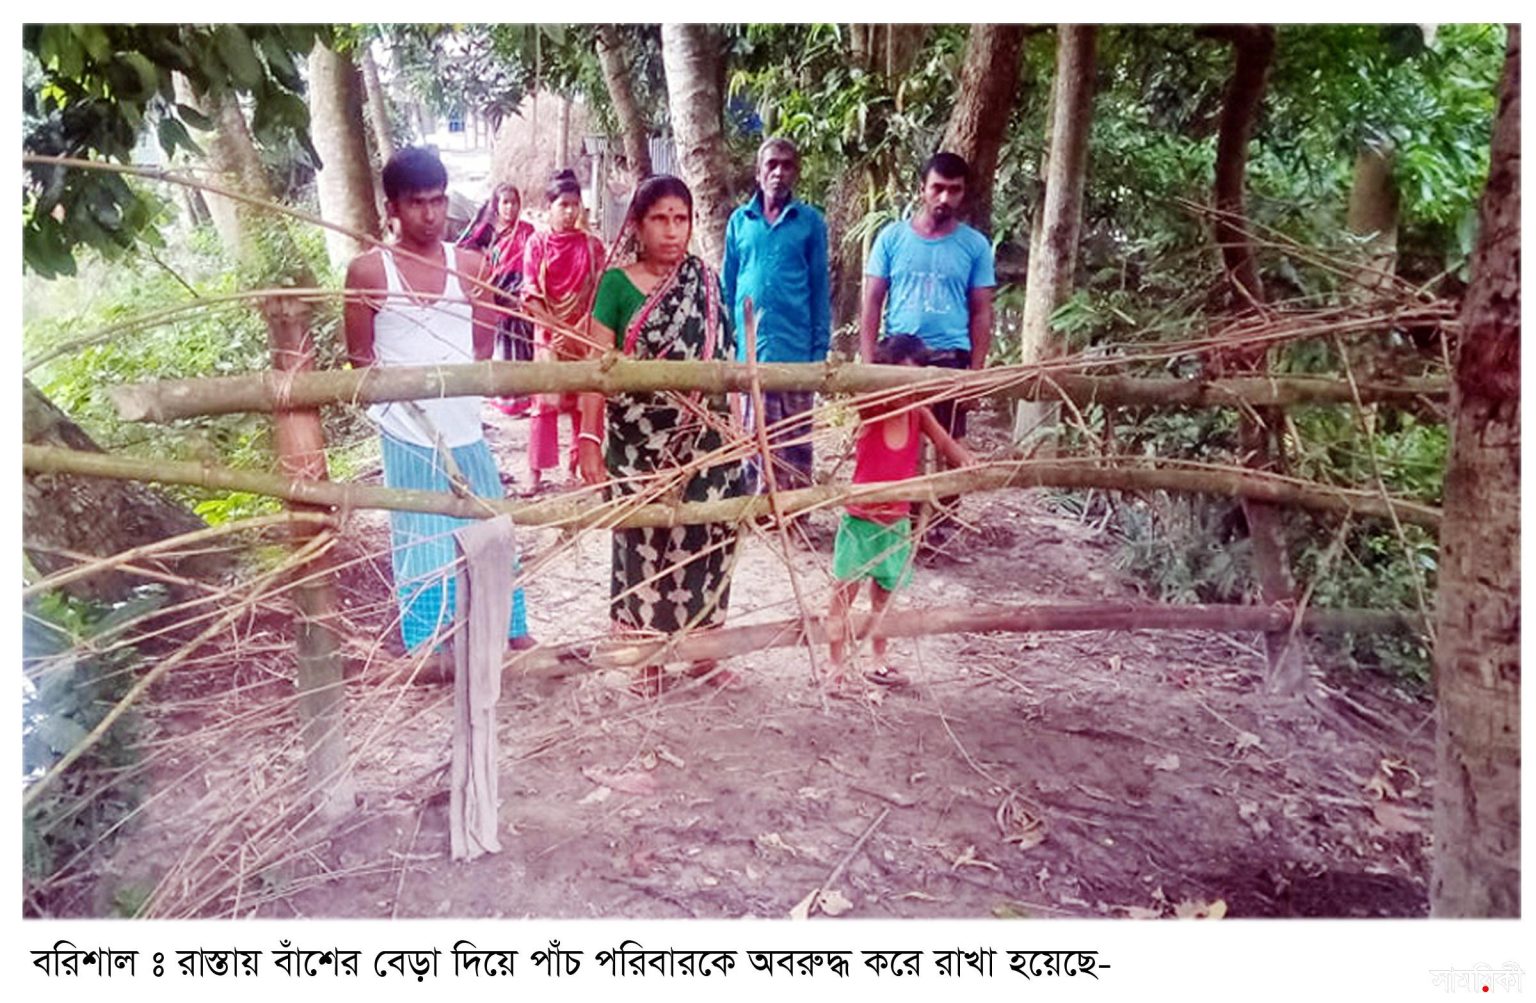 Barishal Photo Five families living under besieged condition since last three months after road connecting their houses blocked by influential at Agoiljhara upazila of Barishal রাস্তায় বাঁশের বেড়া দিয়ে পাঁচ পরিবারকে অবরুদ্ধ